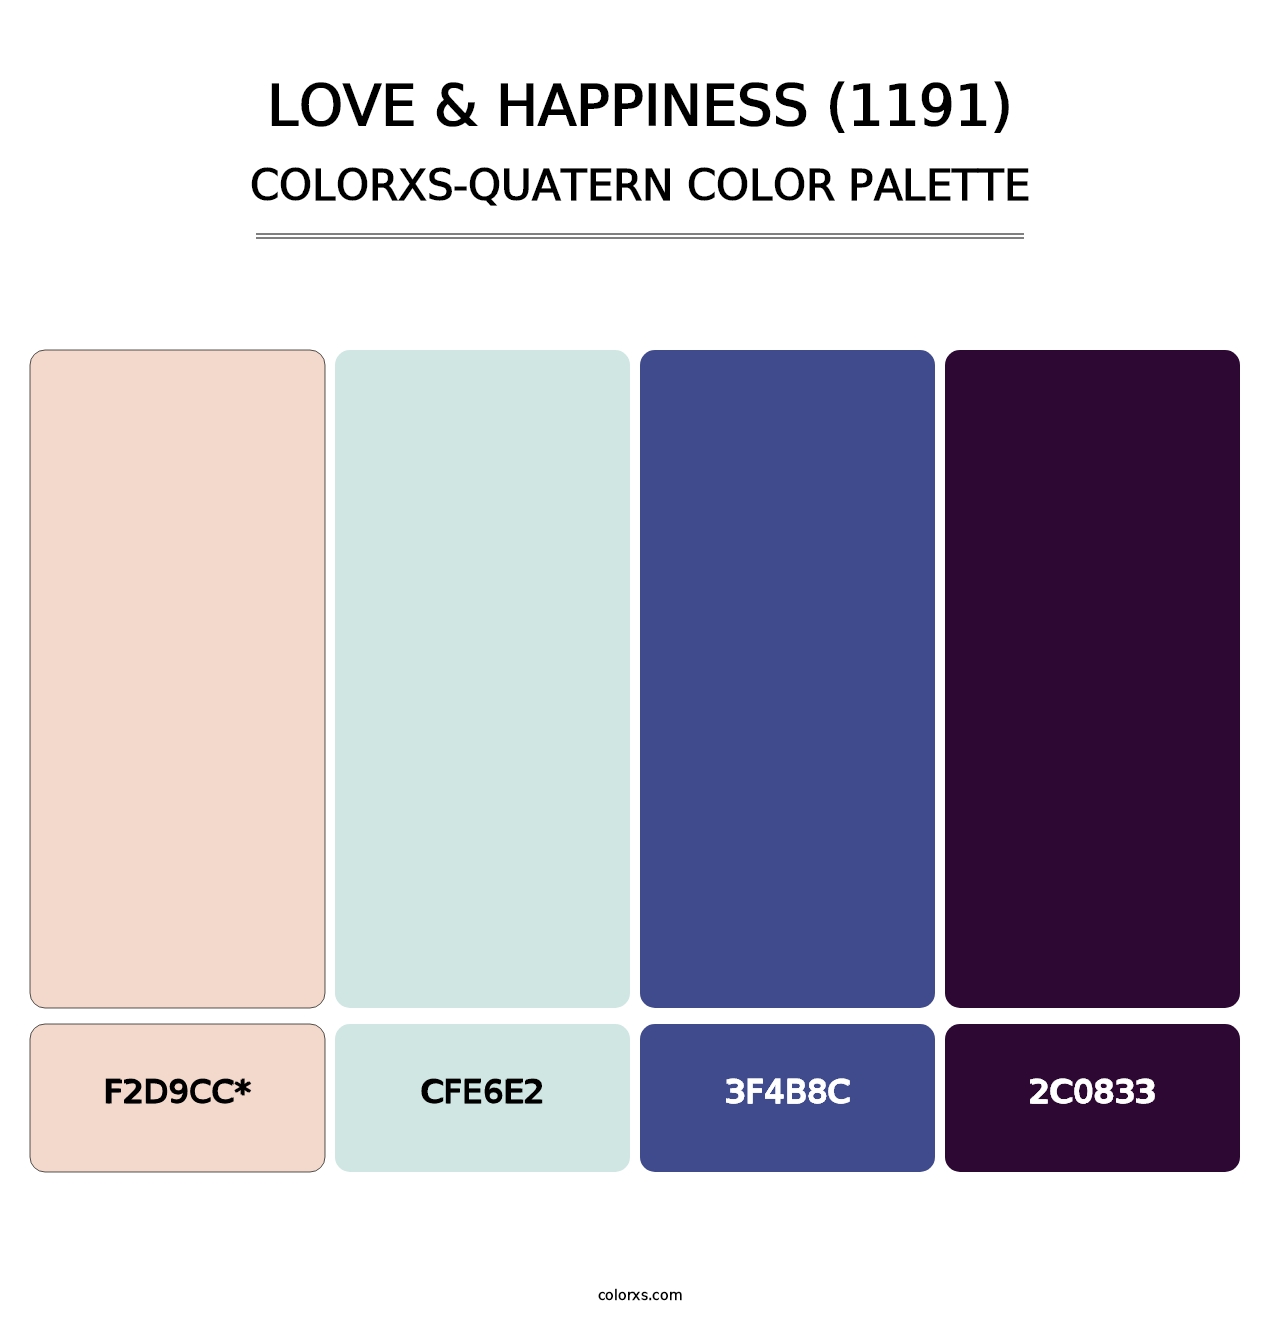 Love & Happiness (1191) - Colorxs Quatern Palette